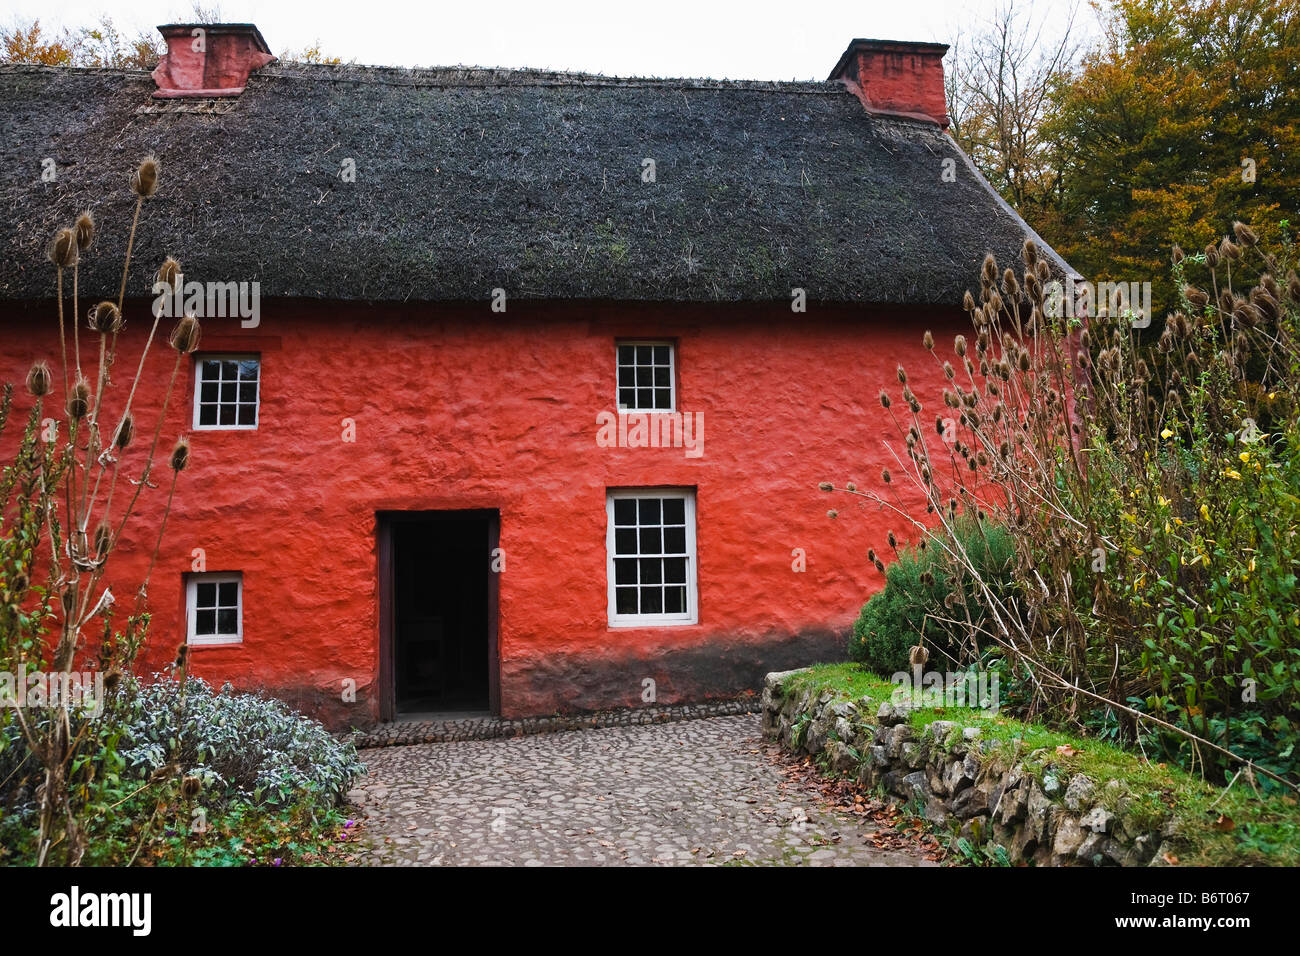 Kennixton Bauernhaus am St Fagans National History Museum in Cardiff, Wales Stockfoto